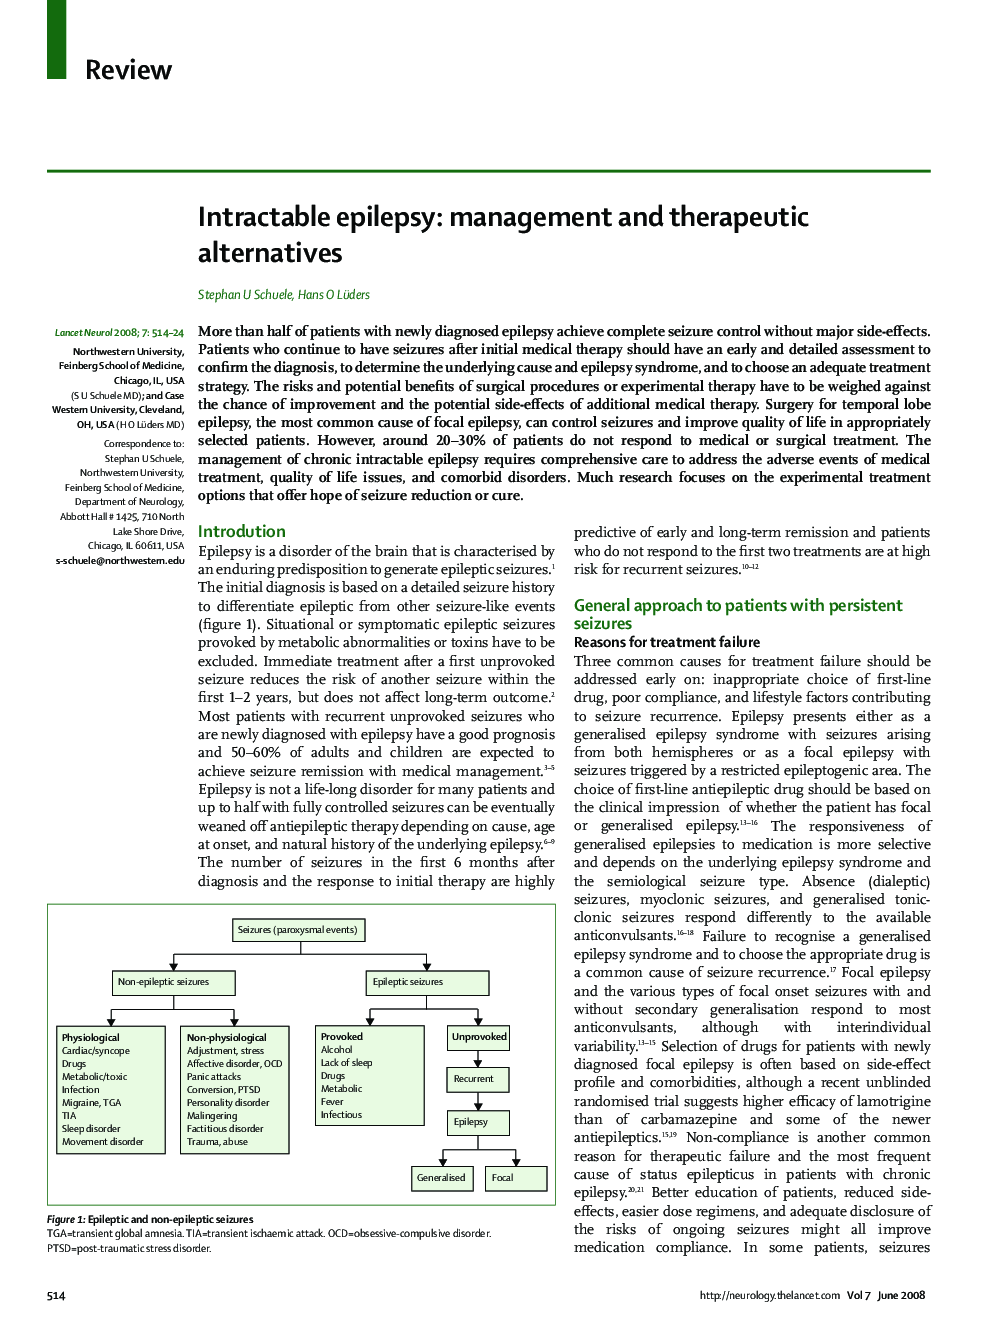 Intractable epilepsy: management and therapeutic alternatives